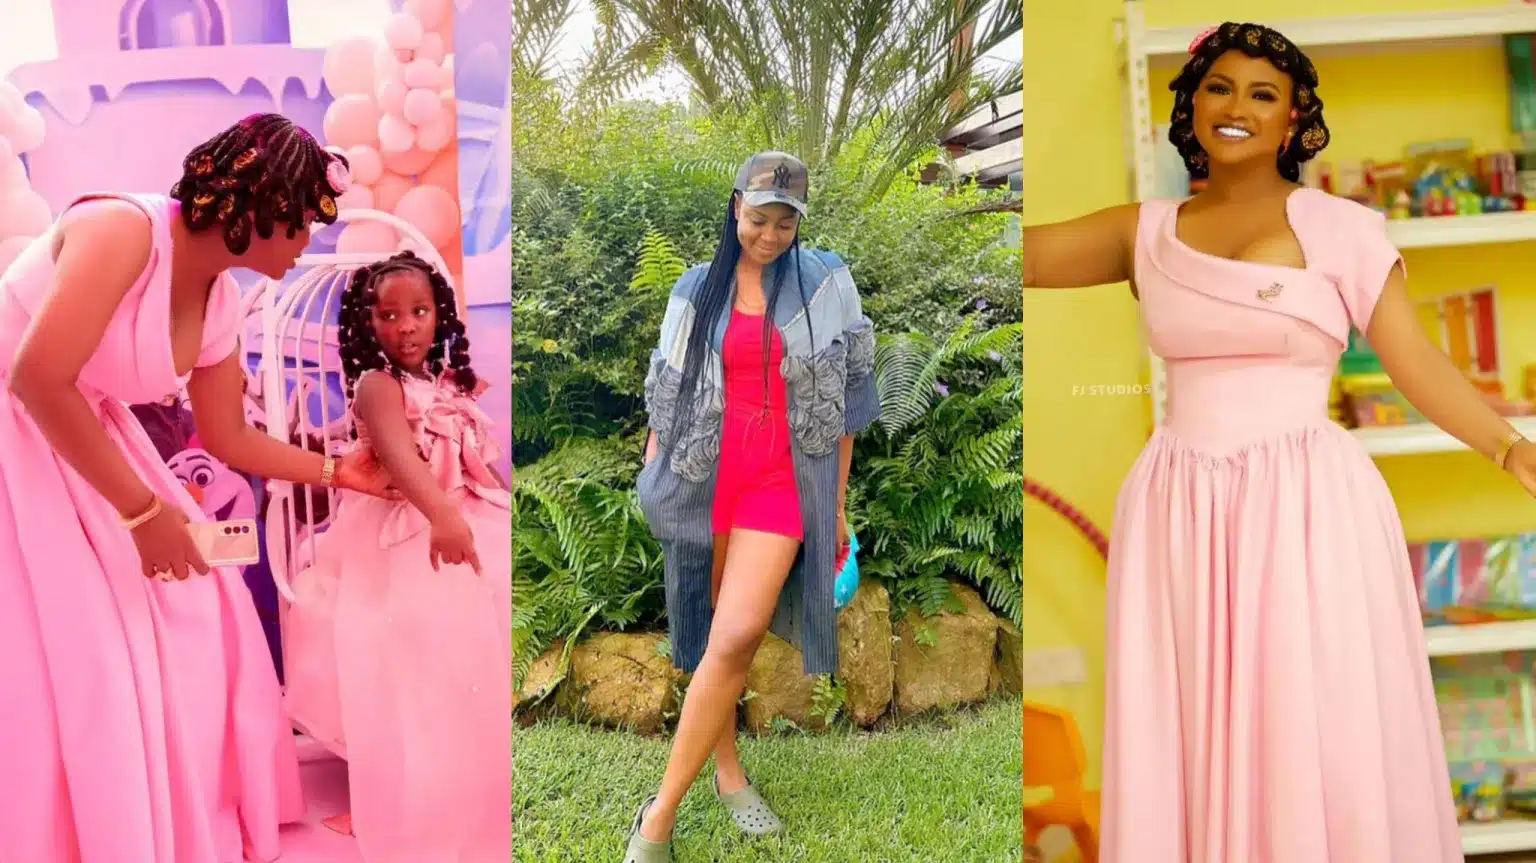 Yvonne Nelson unfollows Nana Ama Mcbrown and shades her for copying her Kids Louge idea – PHOTO